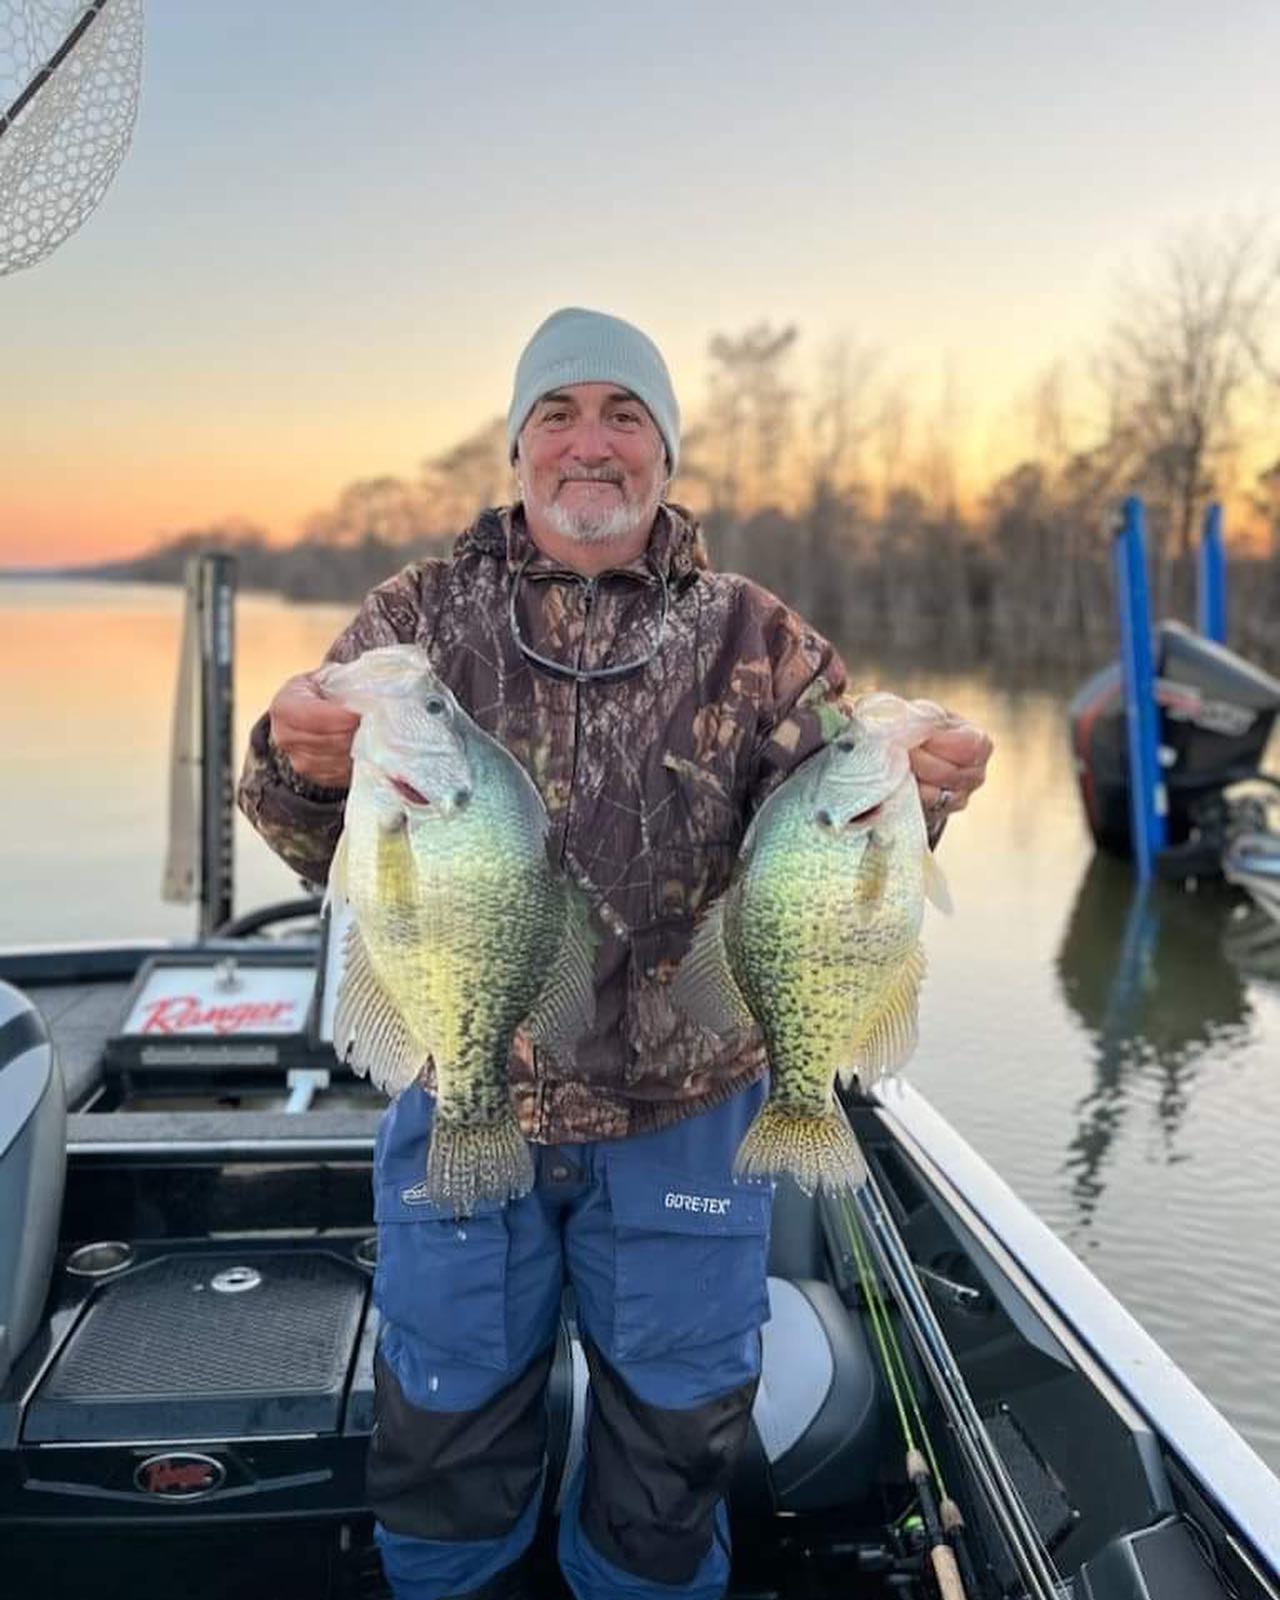 Giant Louisiana Crappie Just Ounces Shy of State Record